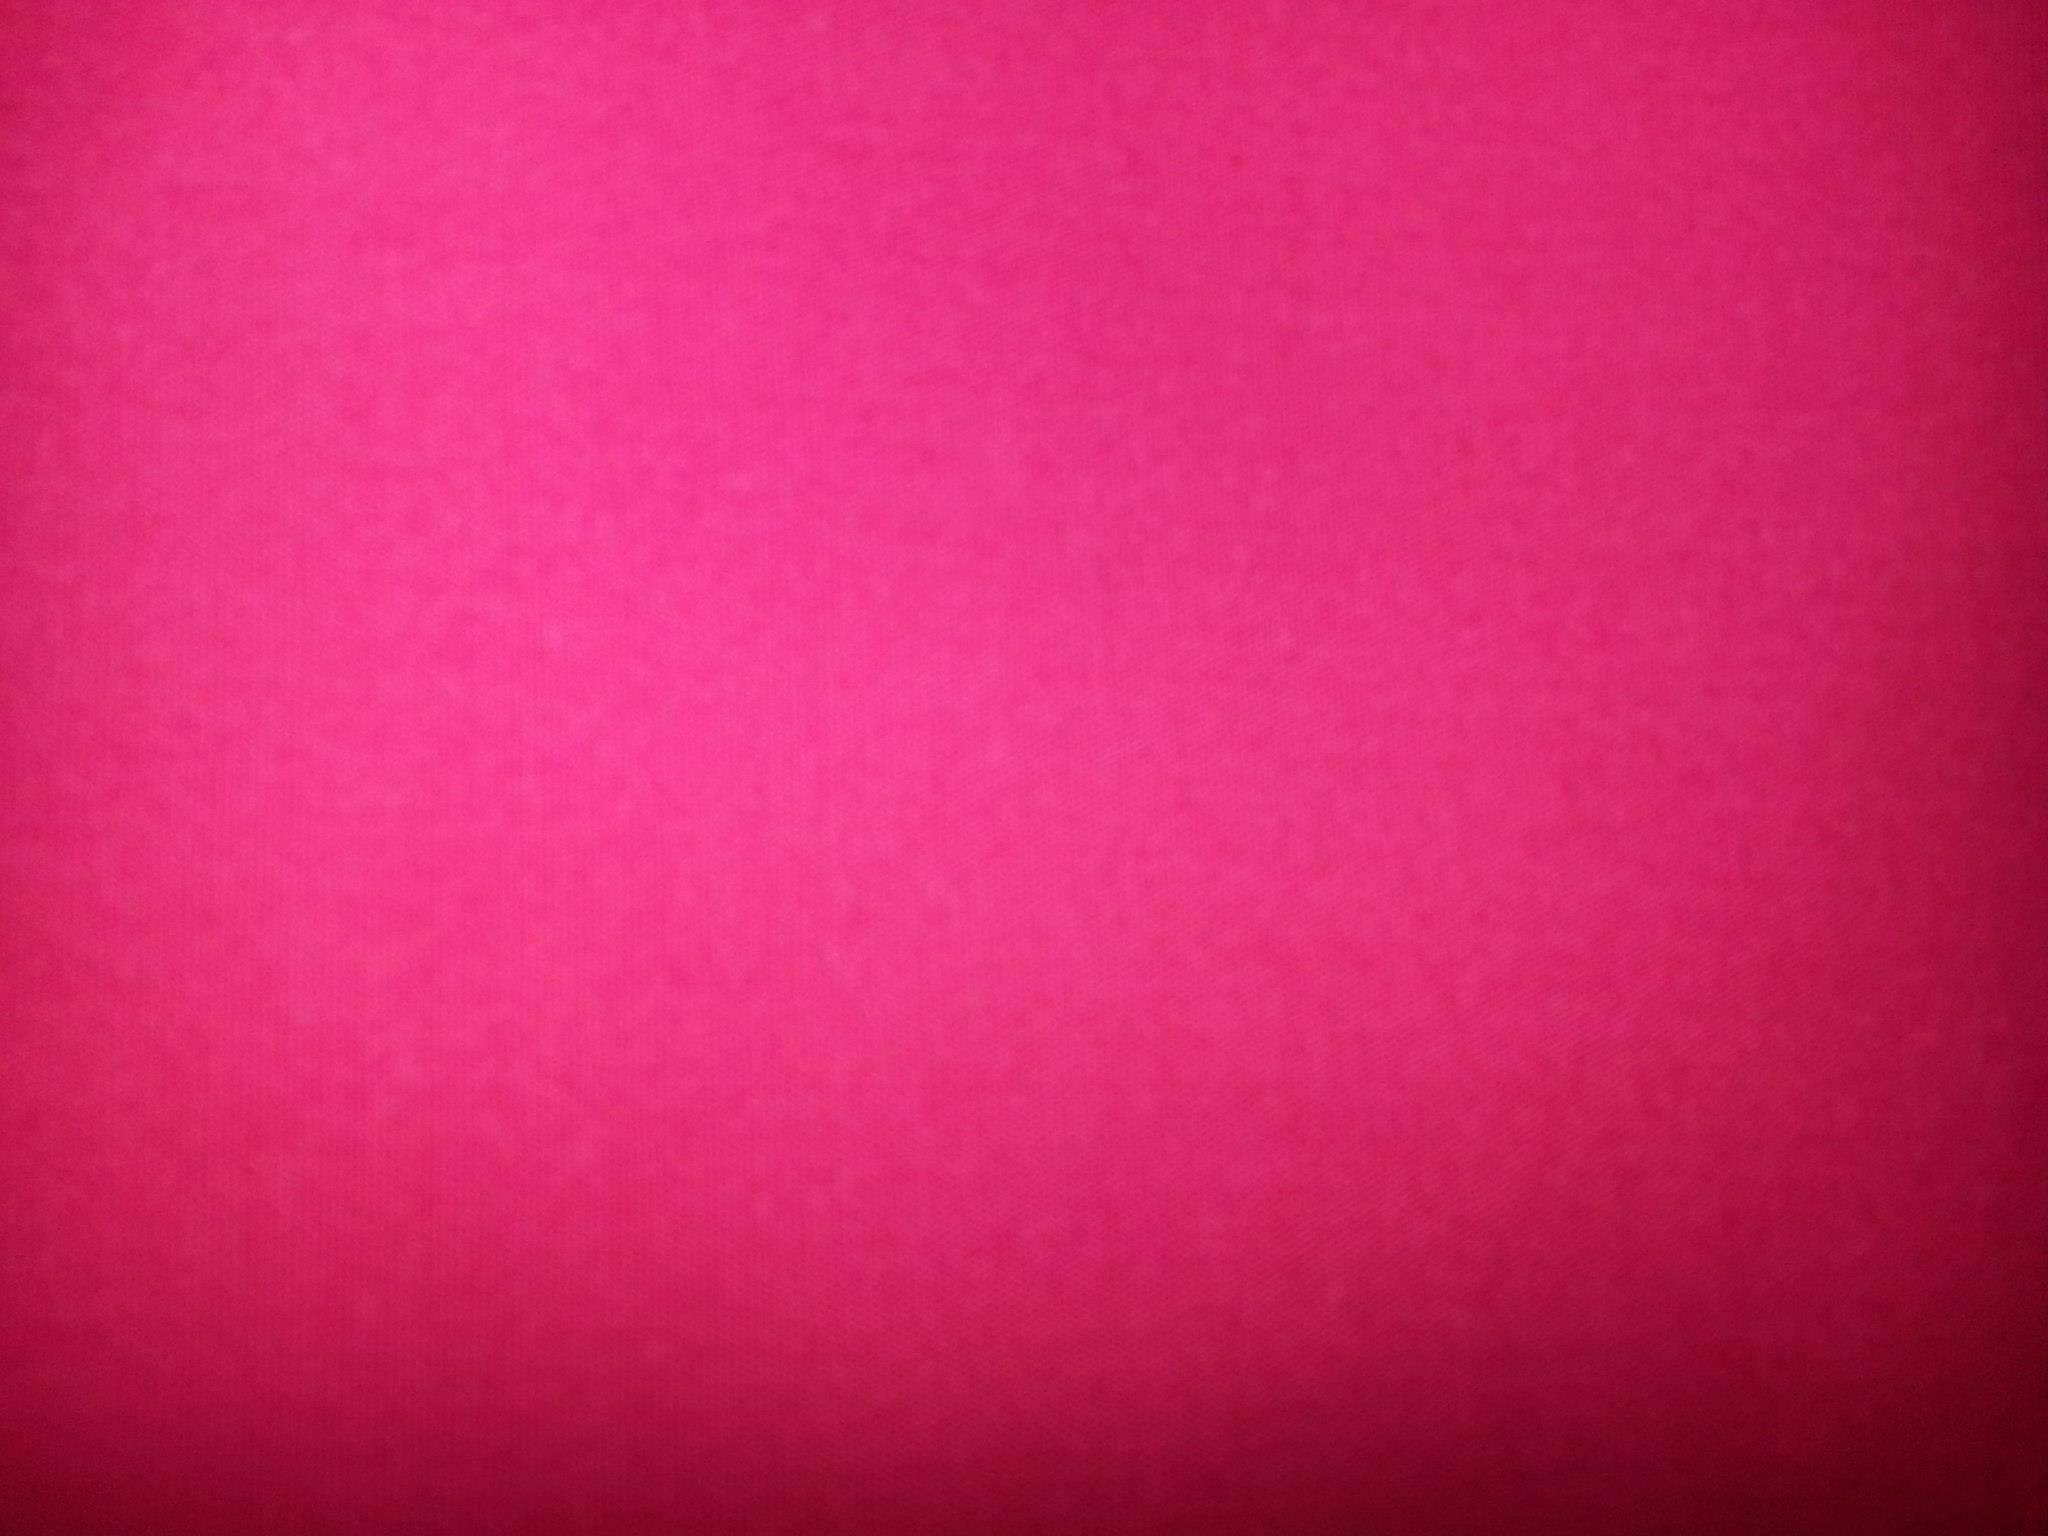 solid pink wallpaper pink solid color light bright 65838 1920×1080